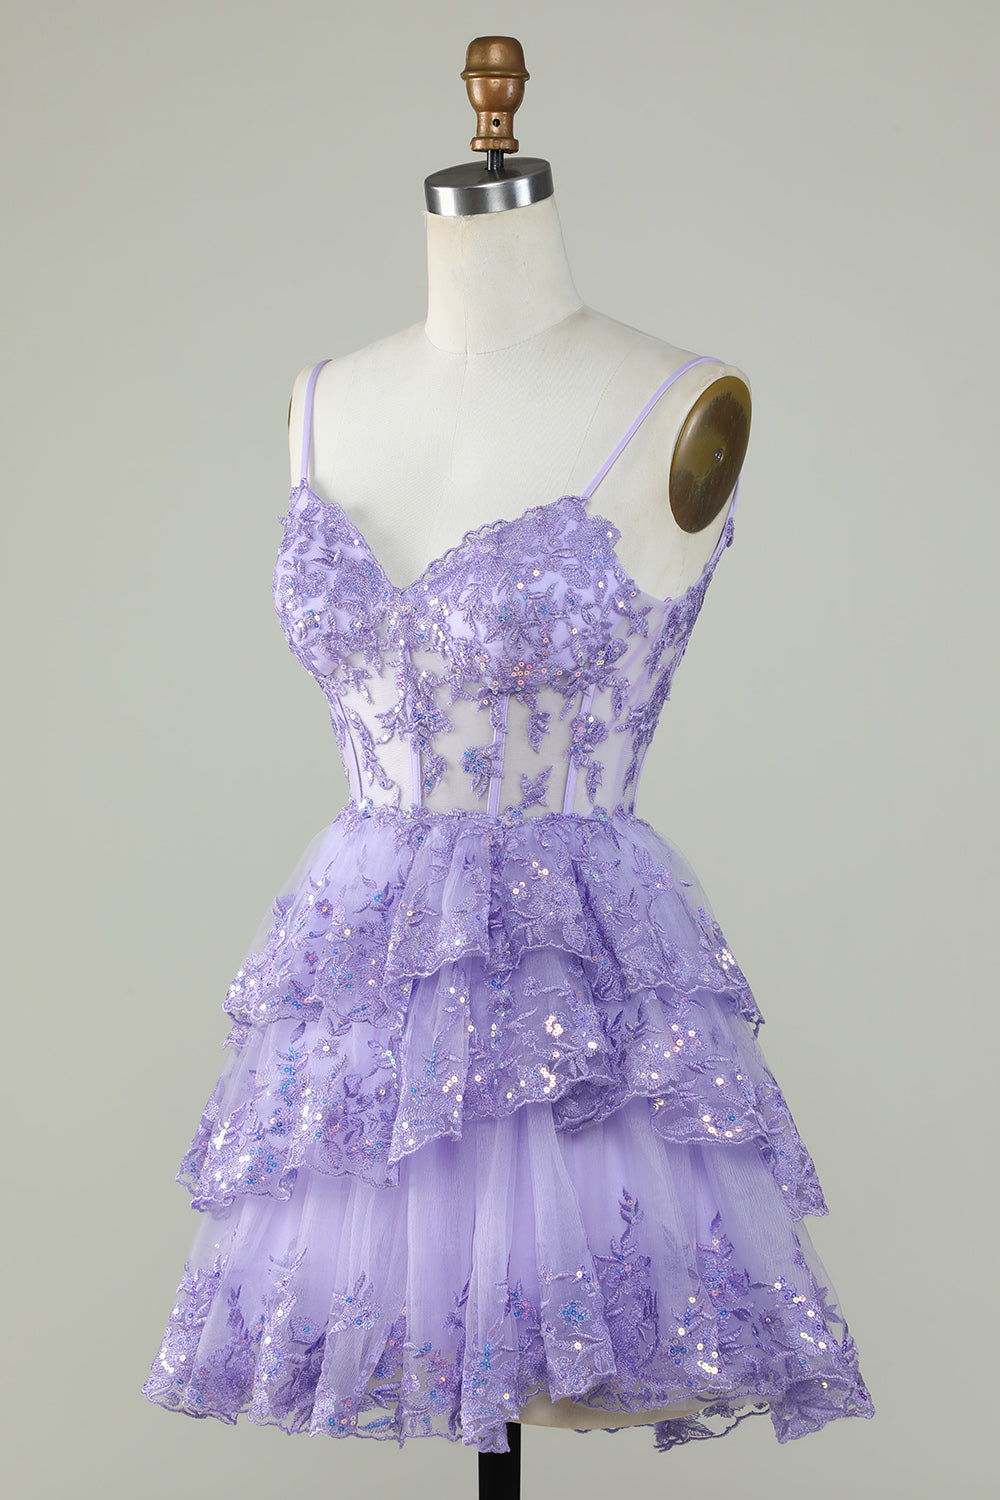 Glitter Lace Corset Ruffle Tiered Short Homecoming Dress in lavender